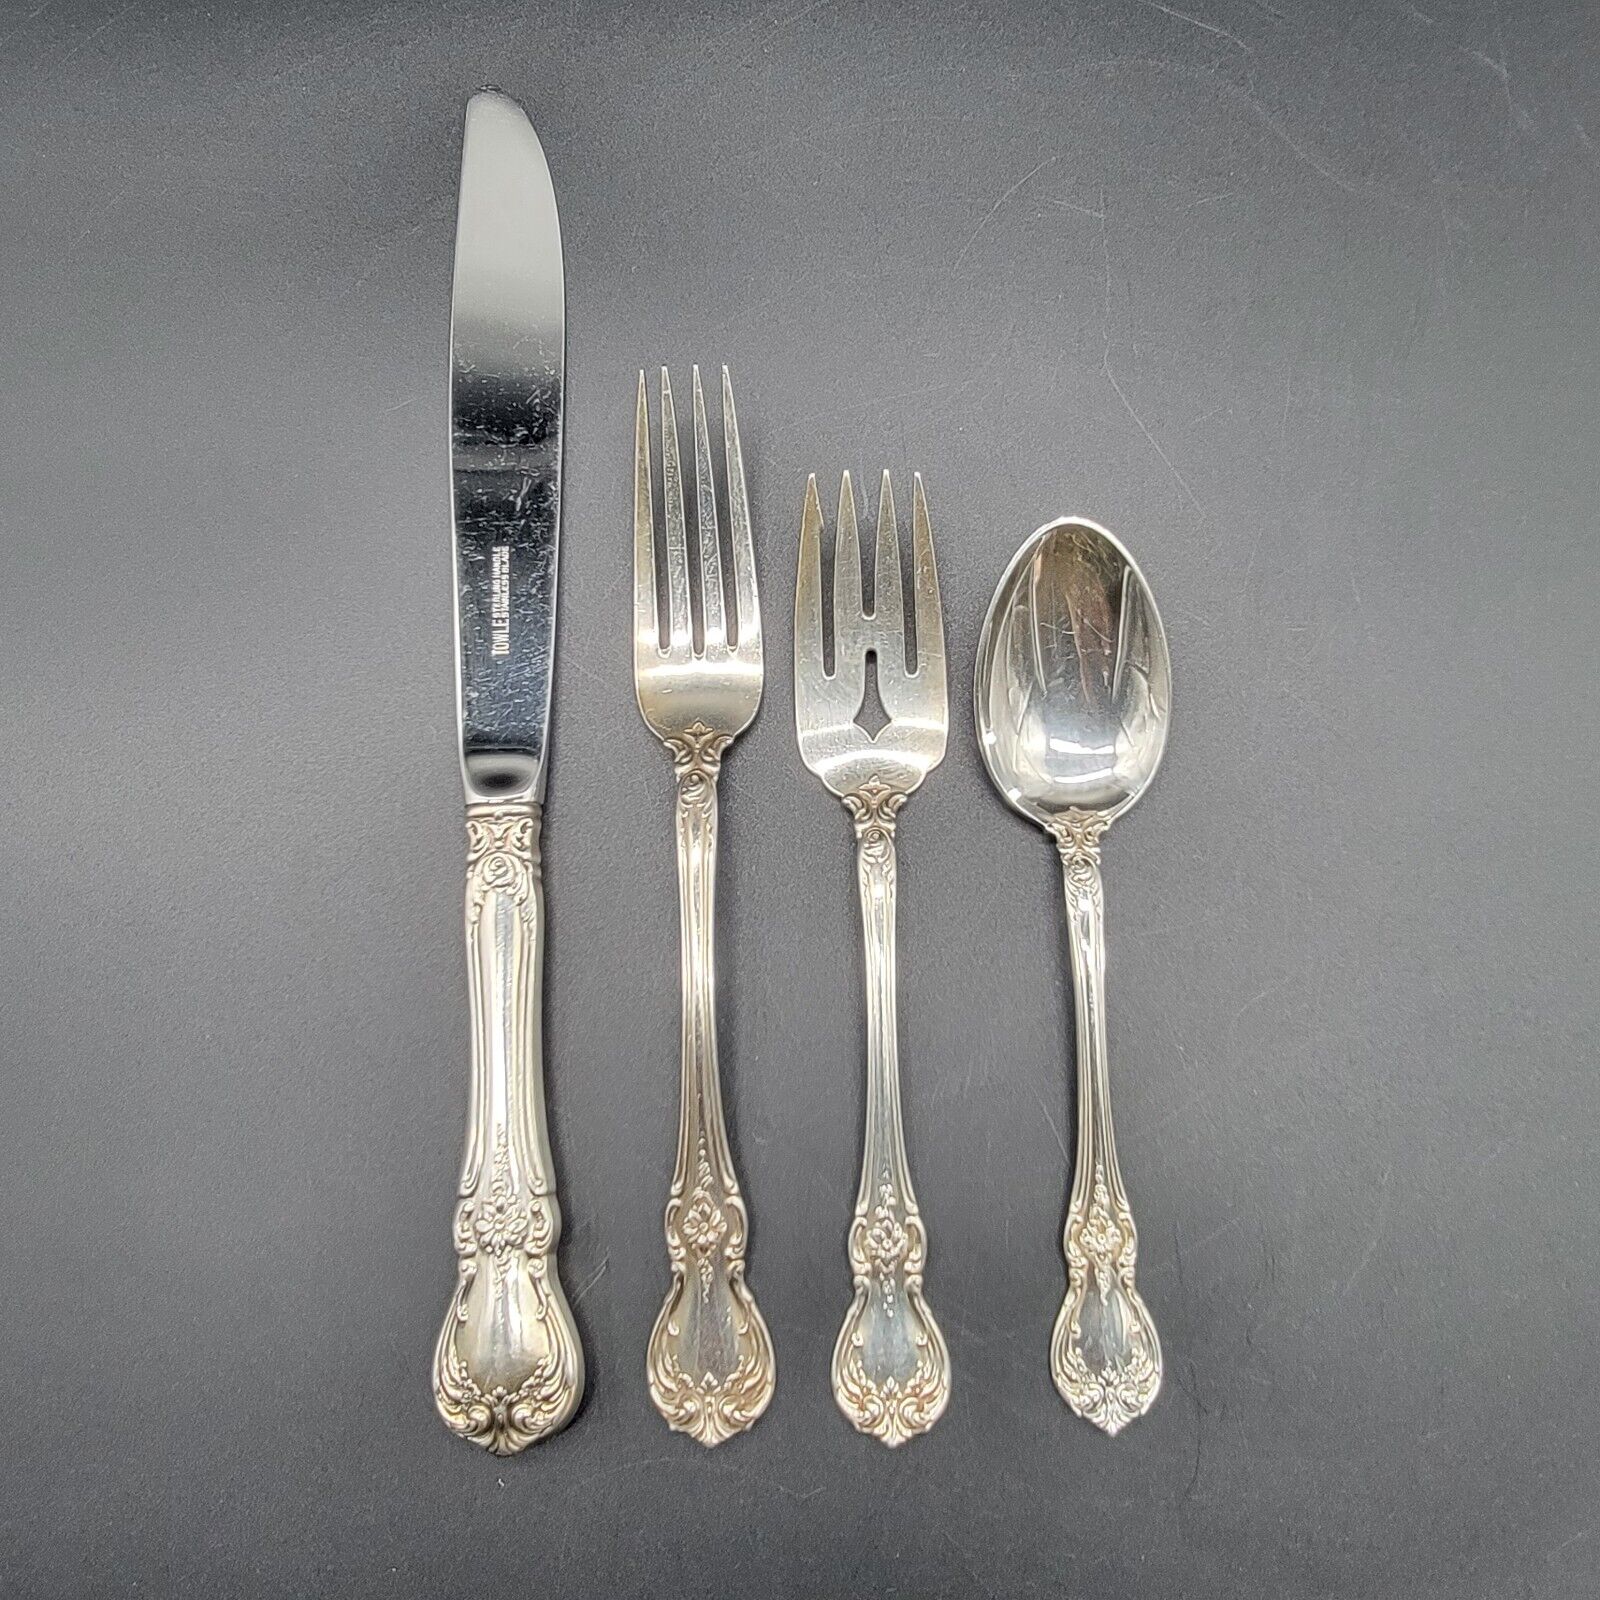 OLD MASTER by TOWLE - 1 Sterling Silver 4-Piece DINNER SIZE Place Setting